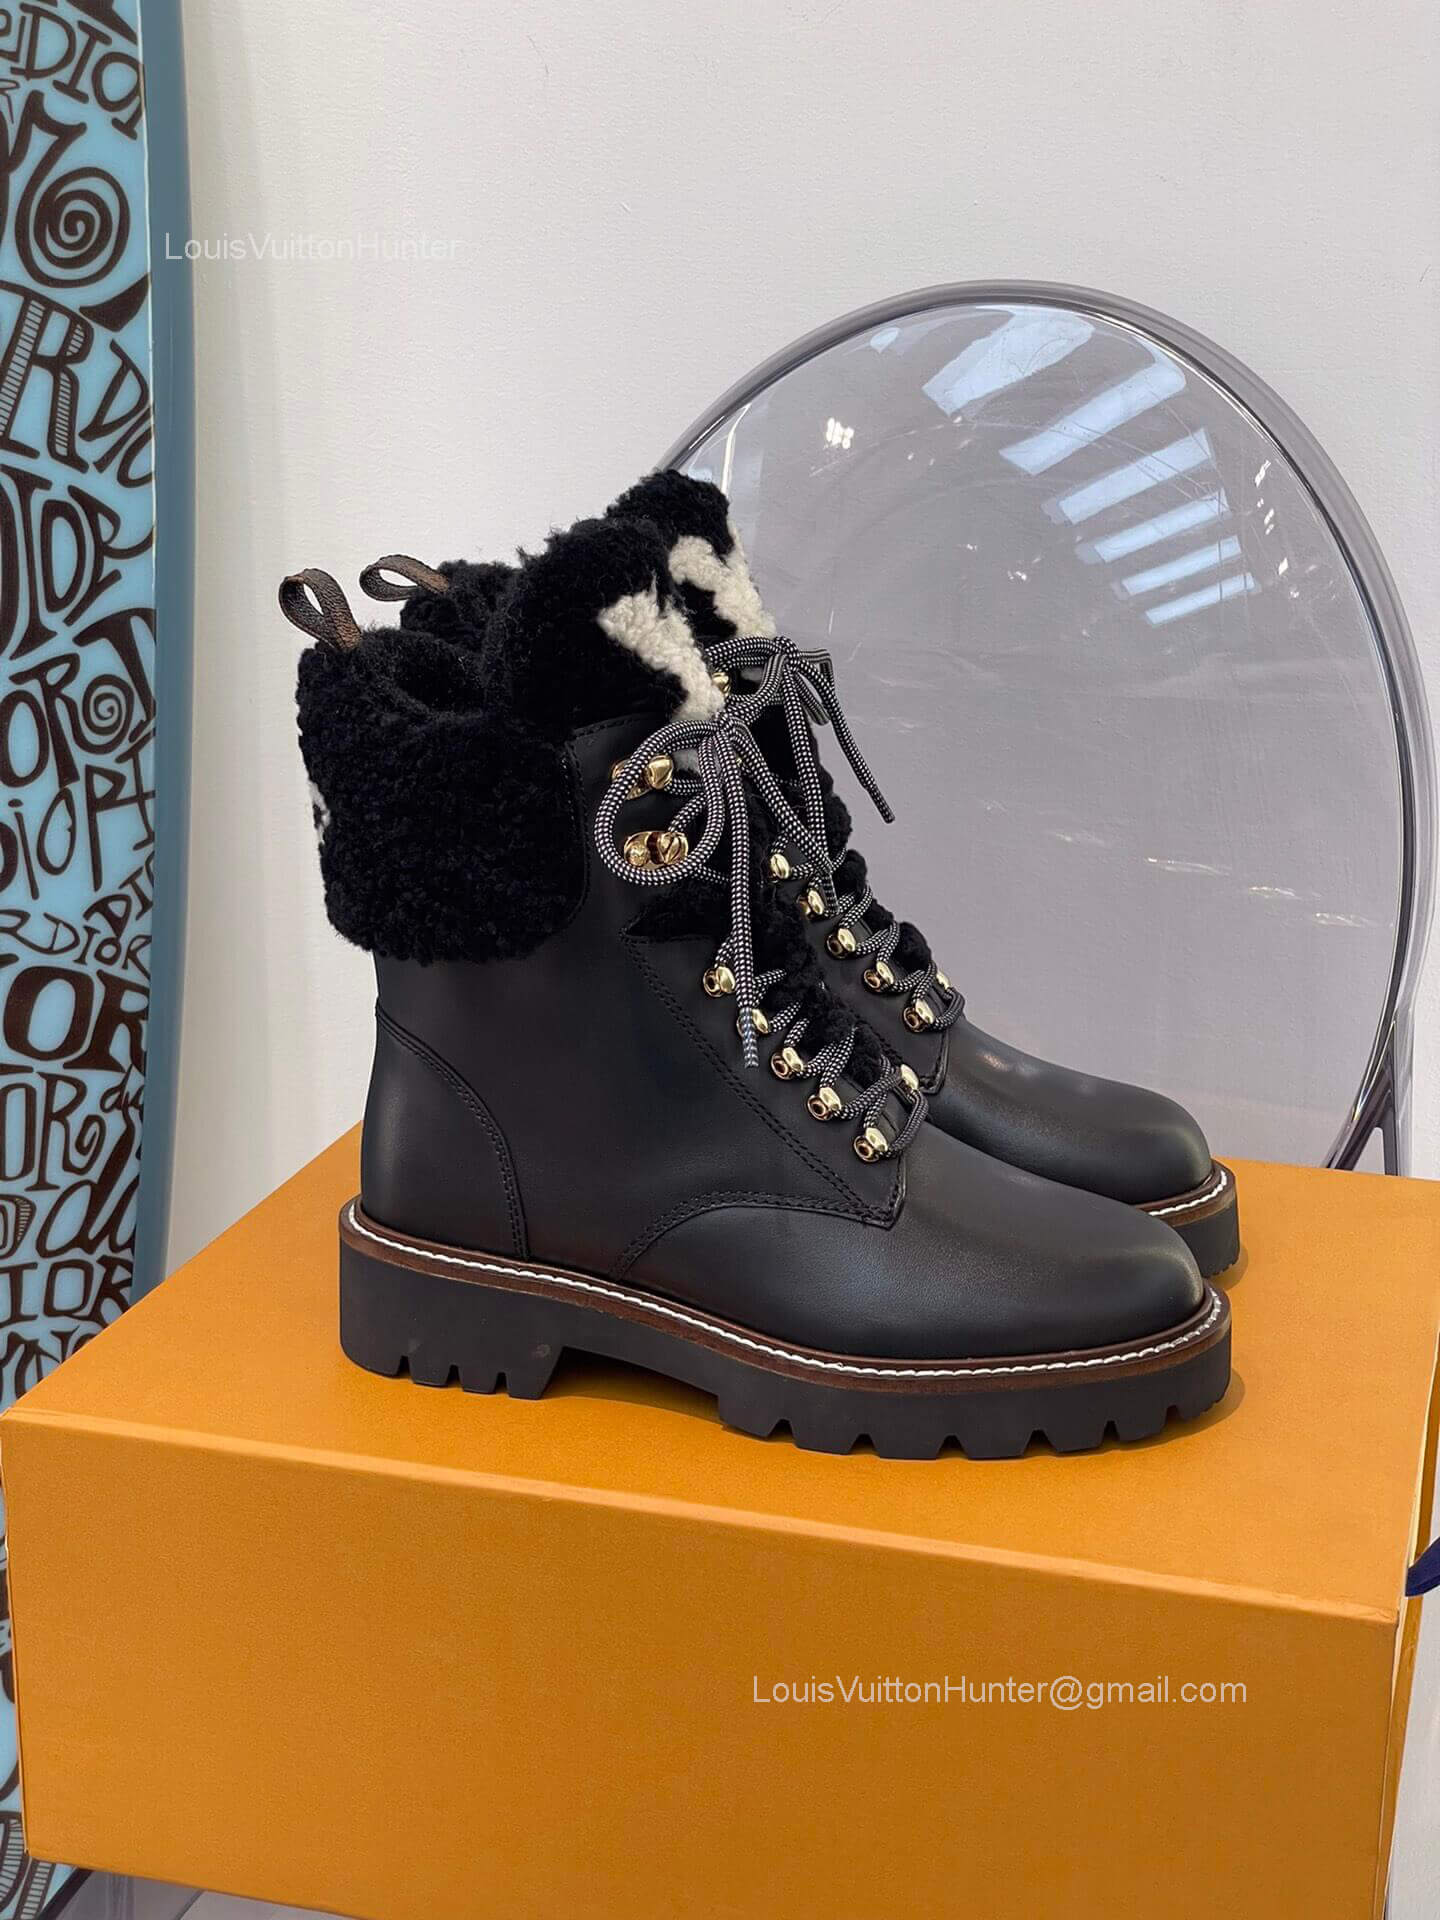 Louis Vuitton Metropolis Flat Ranger Ankle Boot with Shearling Fur in Black Calf Leather 2281691